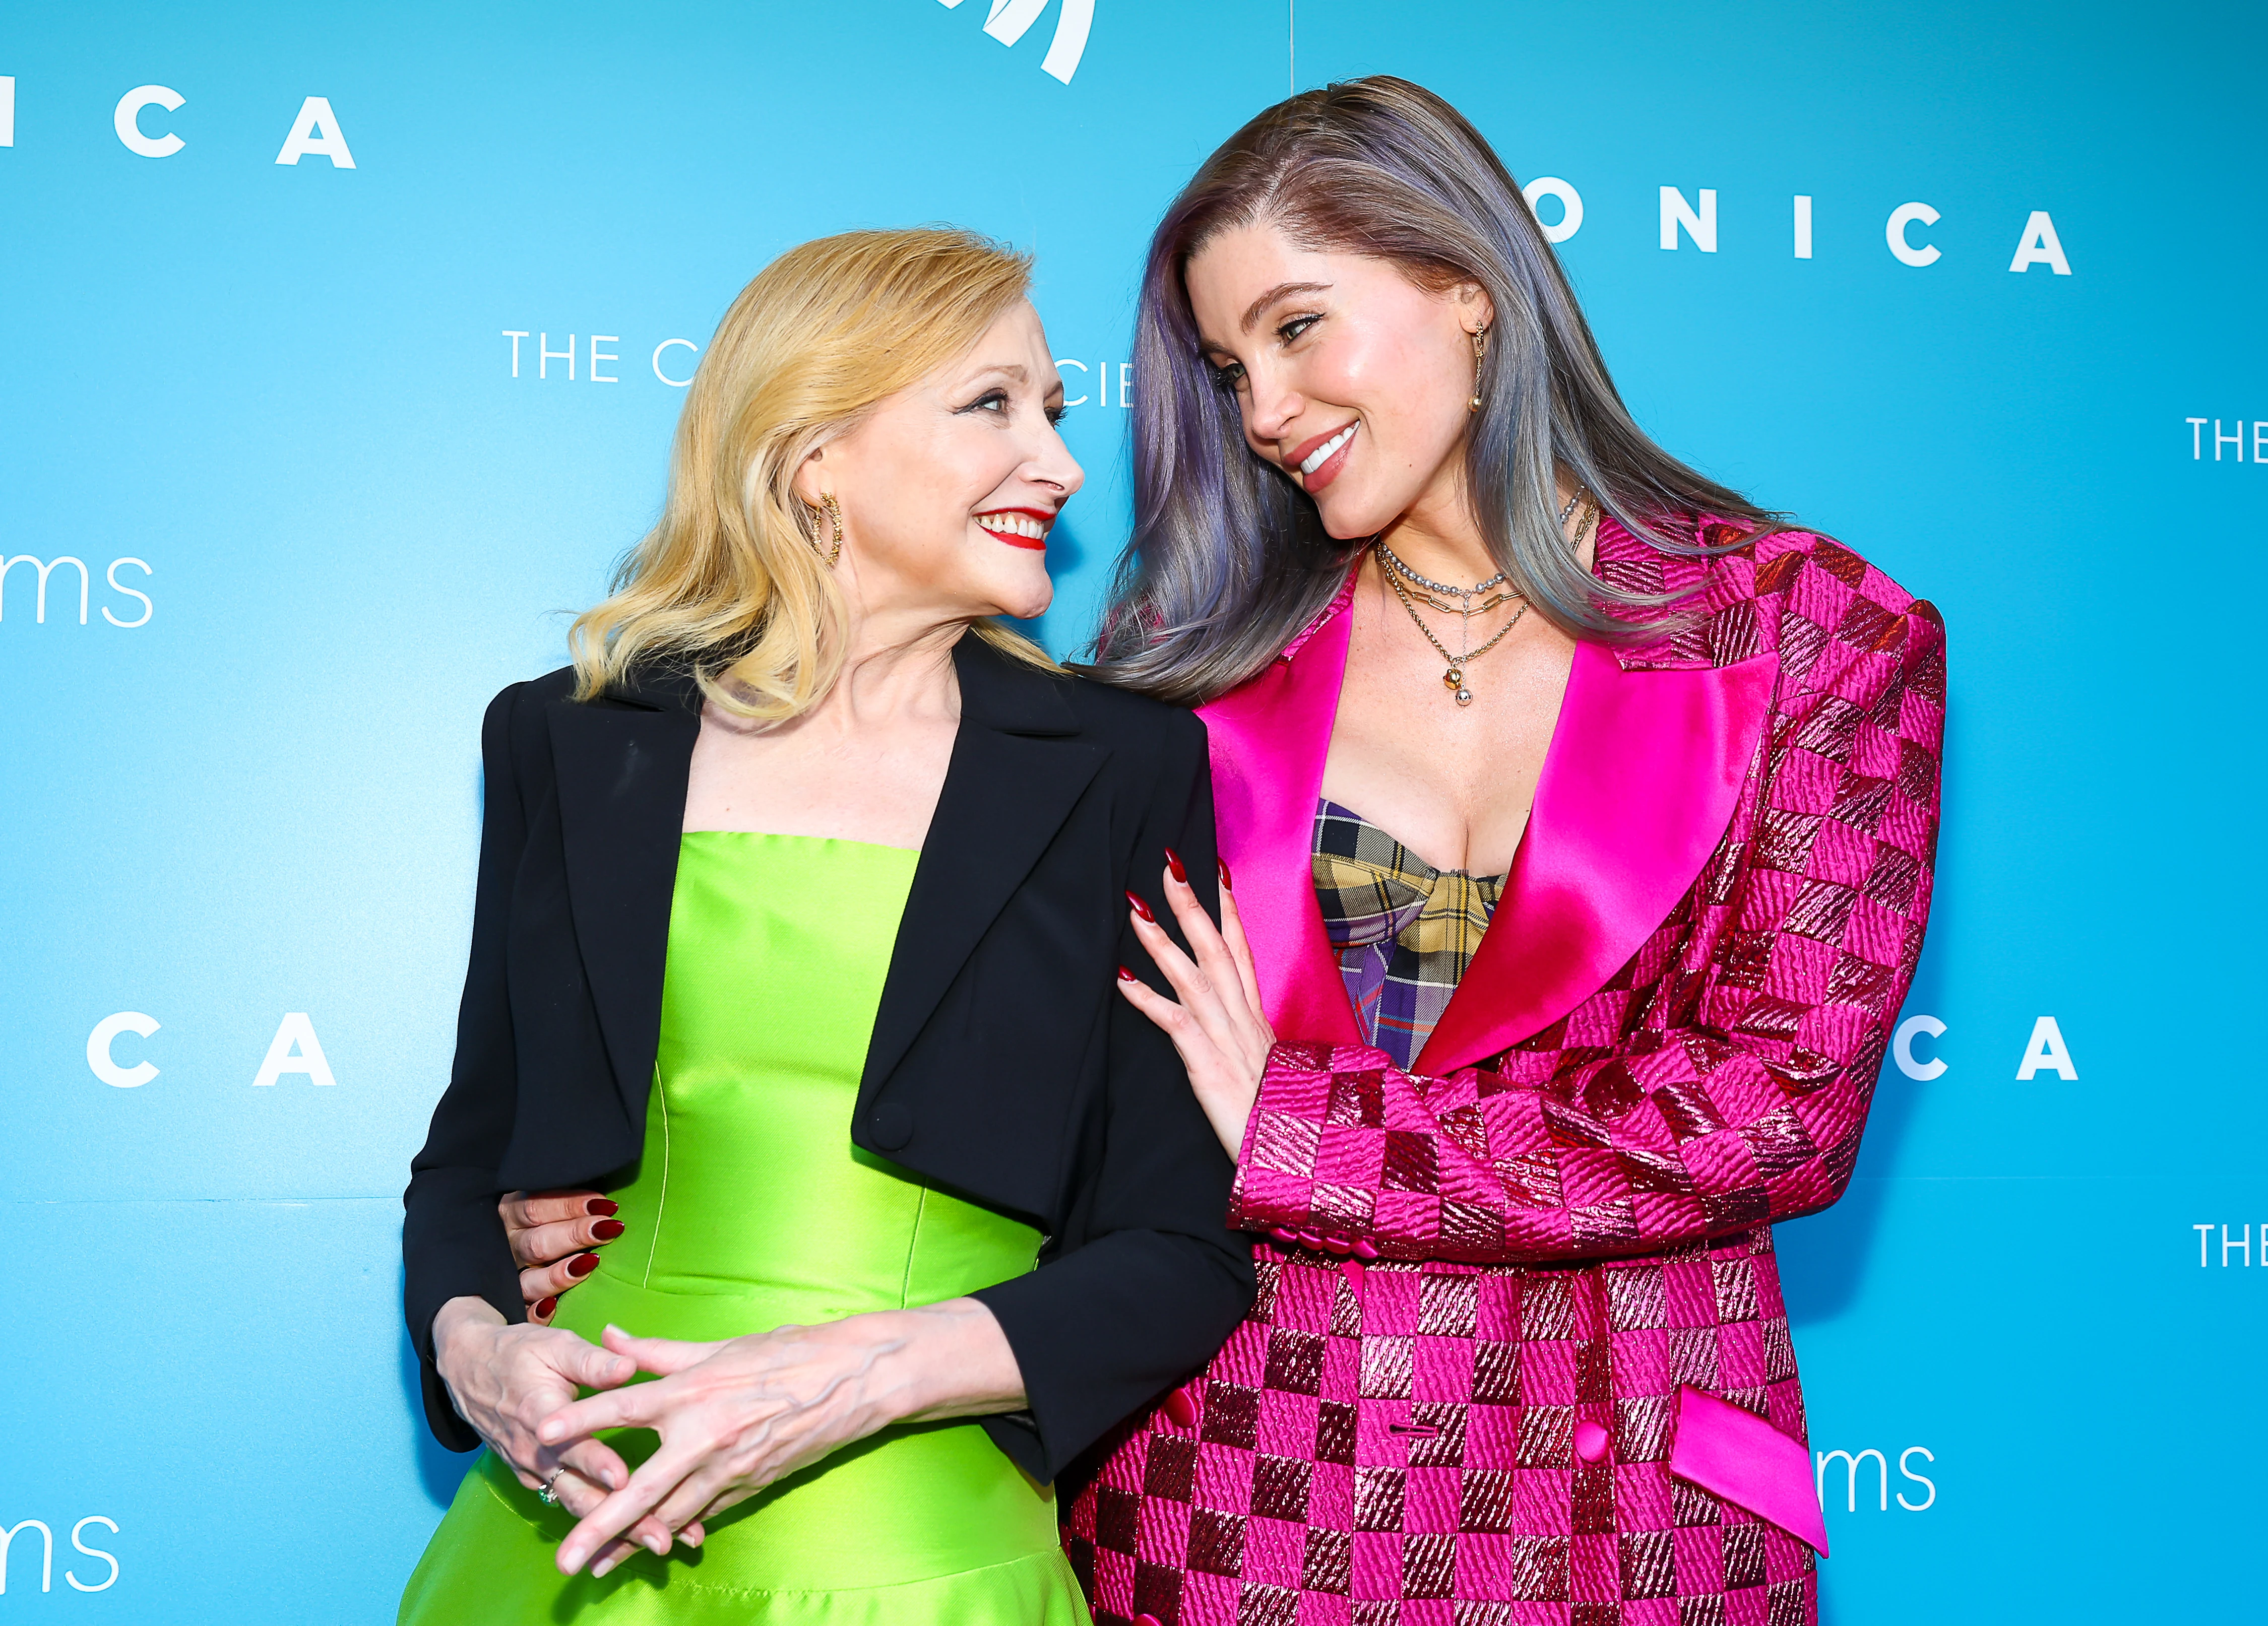 Patricia Clarkson and Trace Lysette